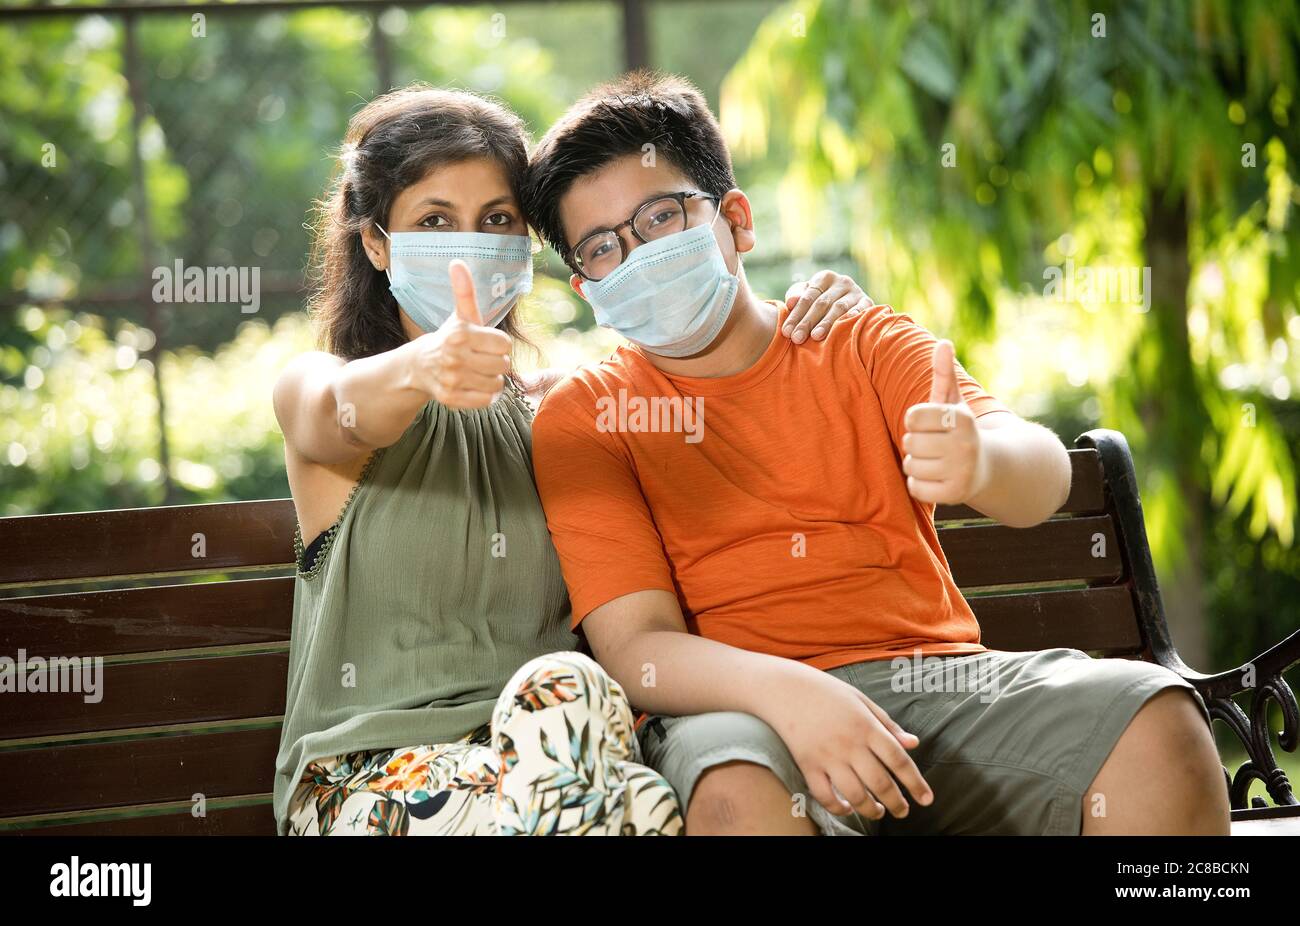 Mother and son with protective face mask giving thumbs up at park Stock Photo